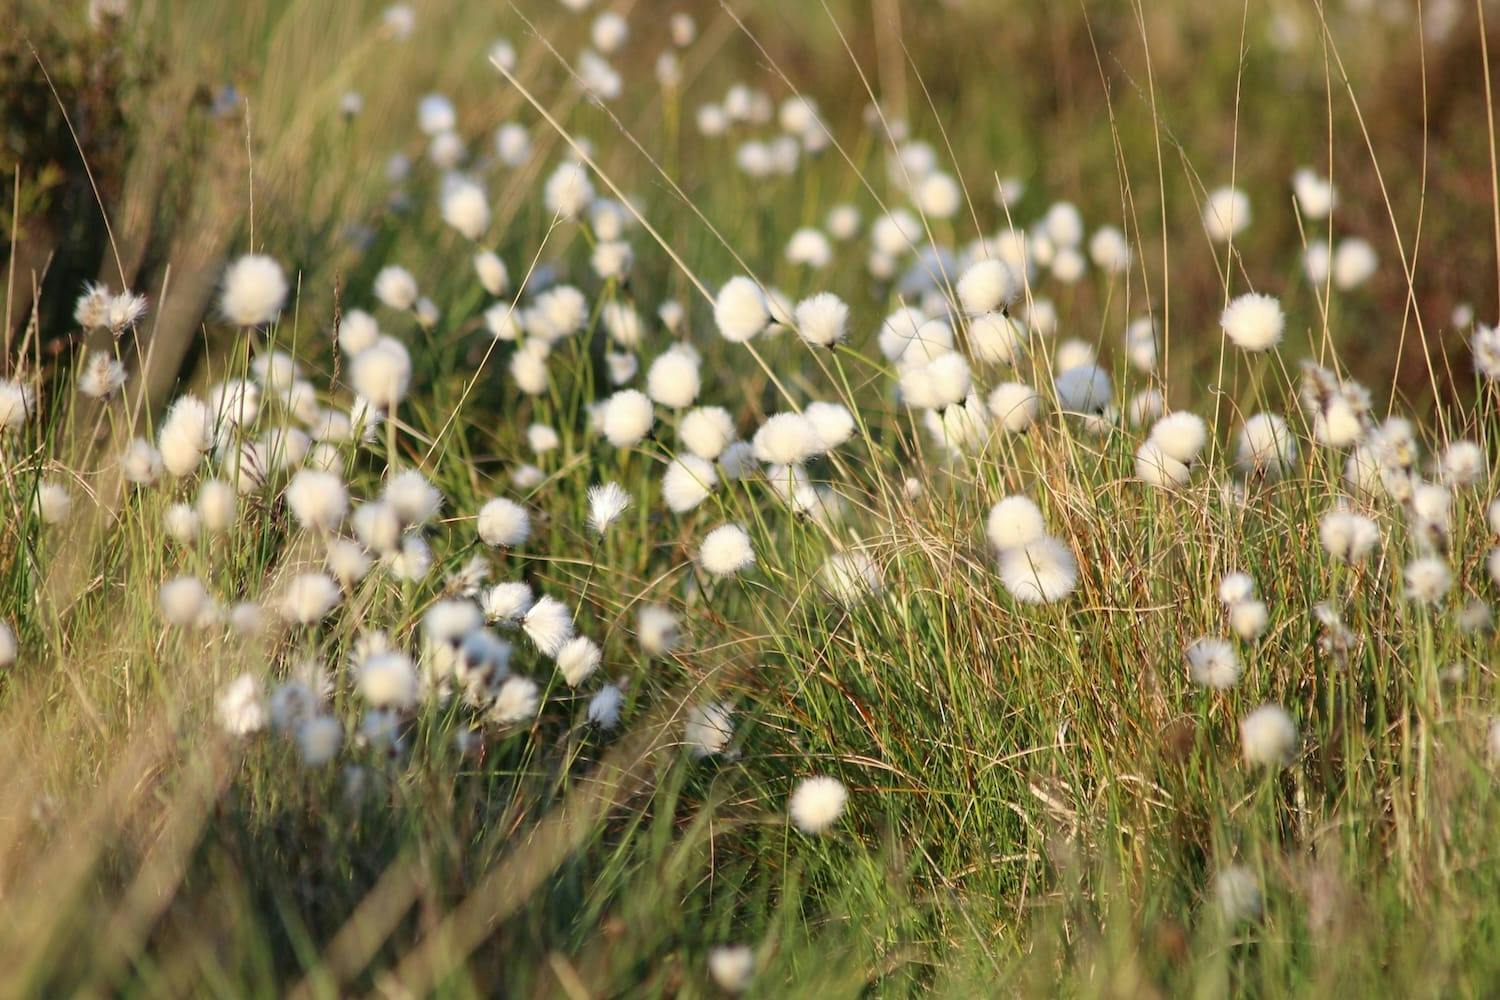 Image shows white flowers among grass.